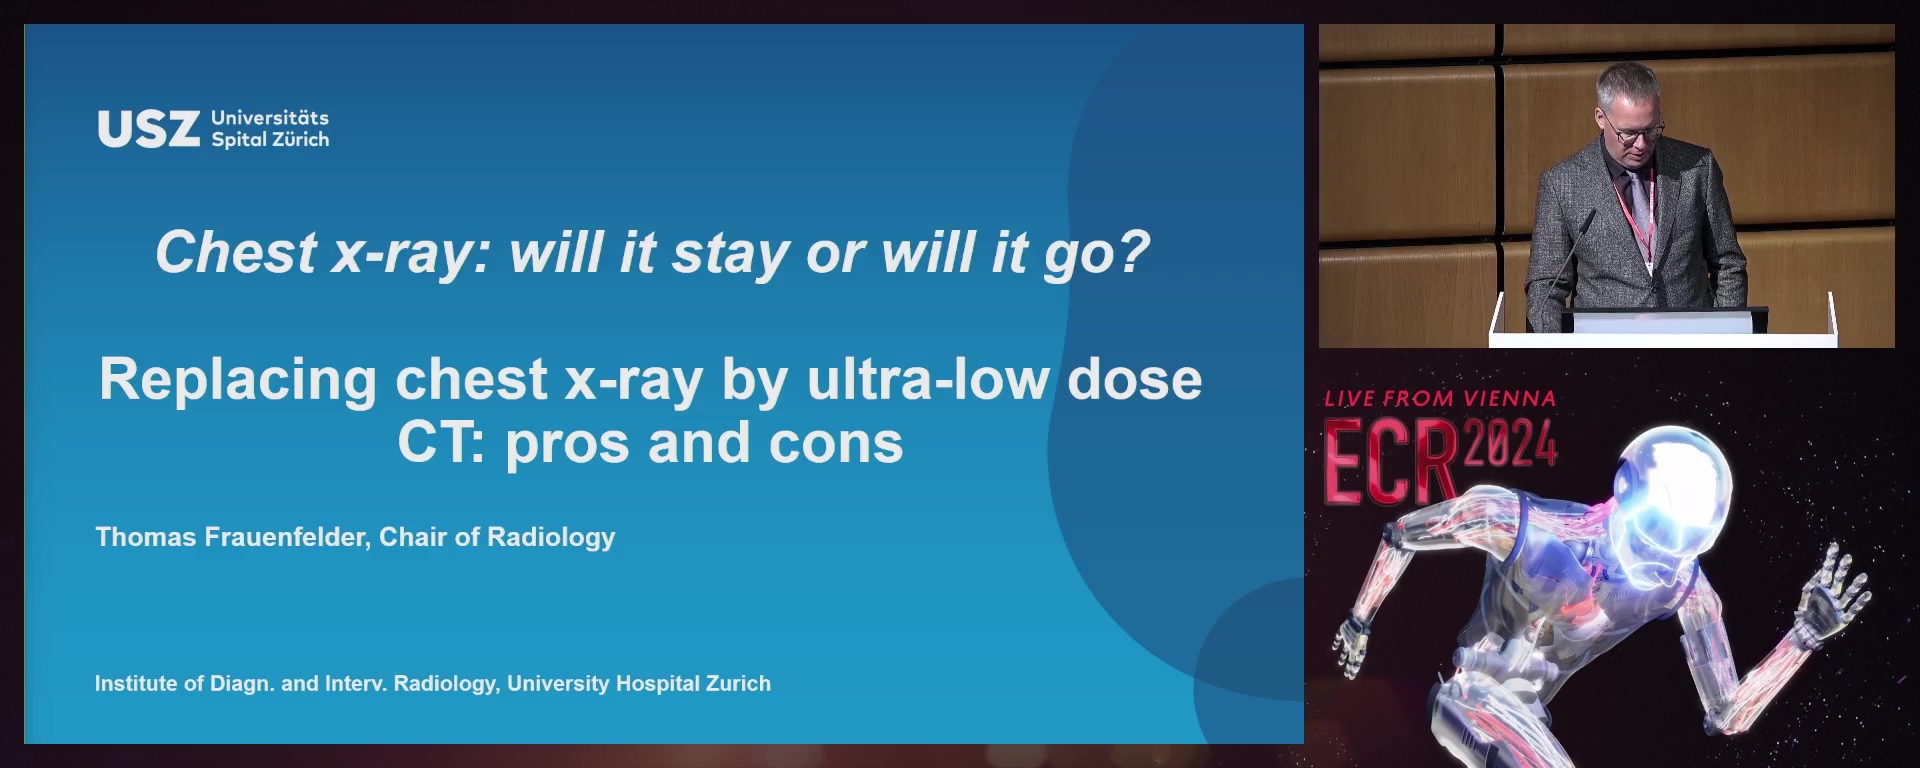 Replacing chest x-ray by ultra-low dose CT: pros and cons